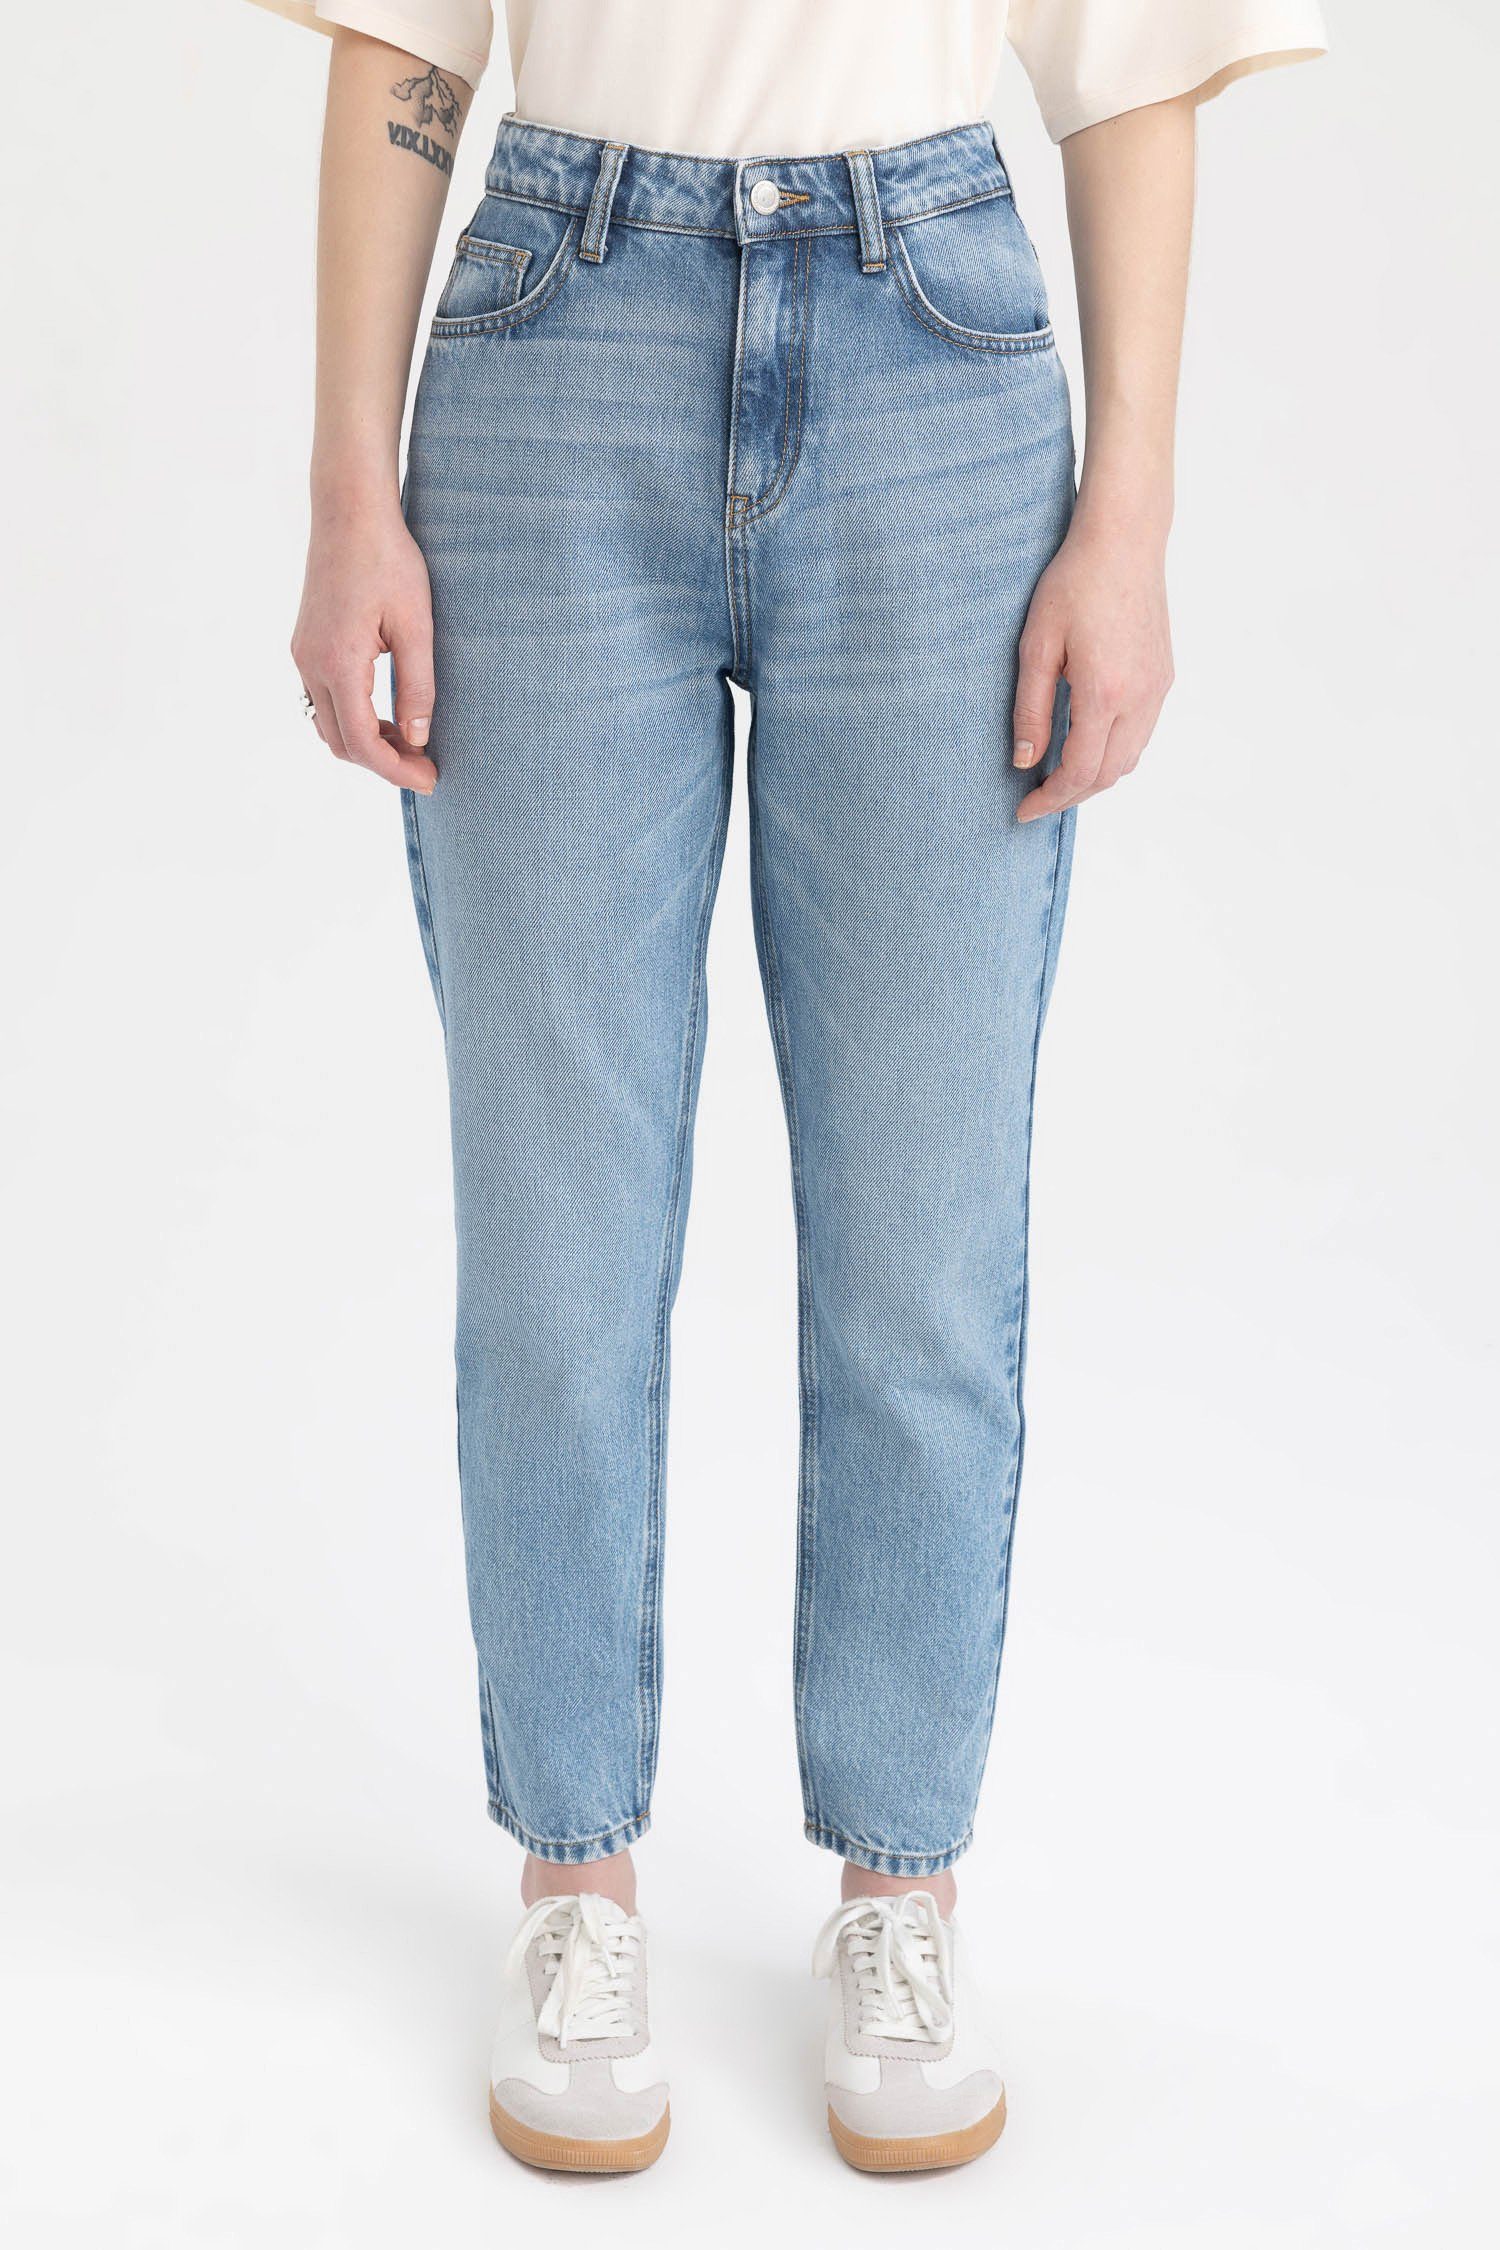 DeFacto Mom-Jeans Damen Mom-Jeans FIT MOM